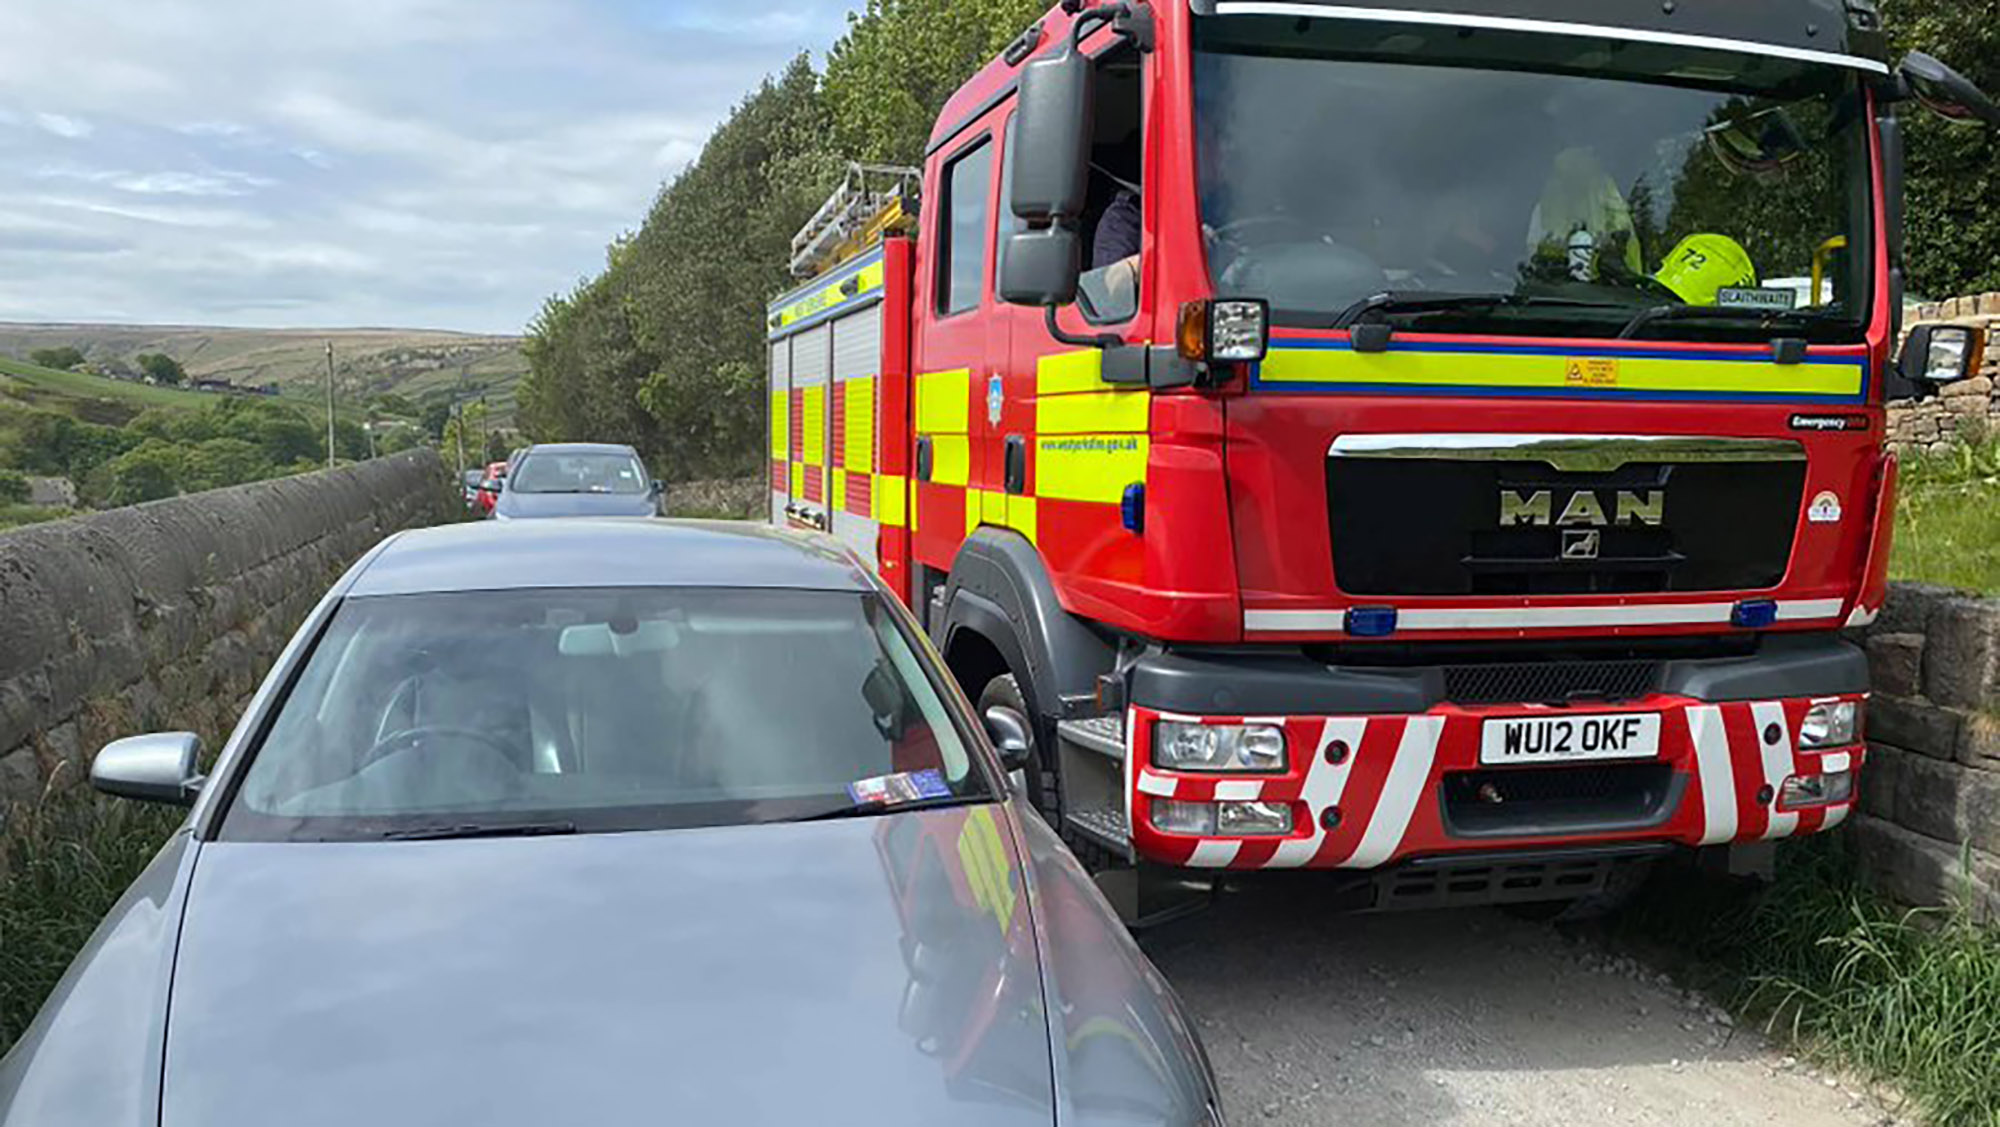 Calderdale irresponsible parking with Fire Engine